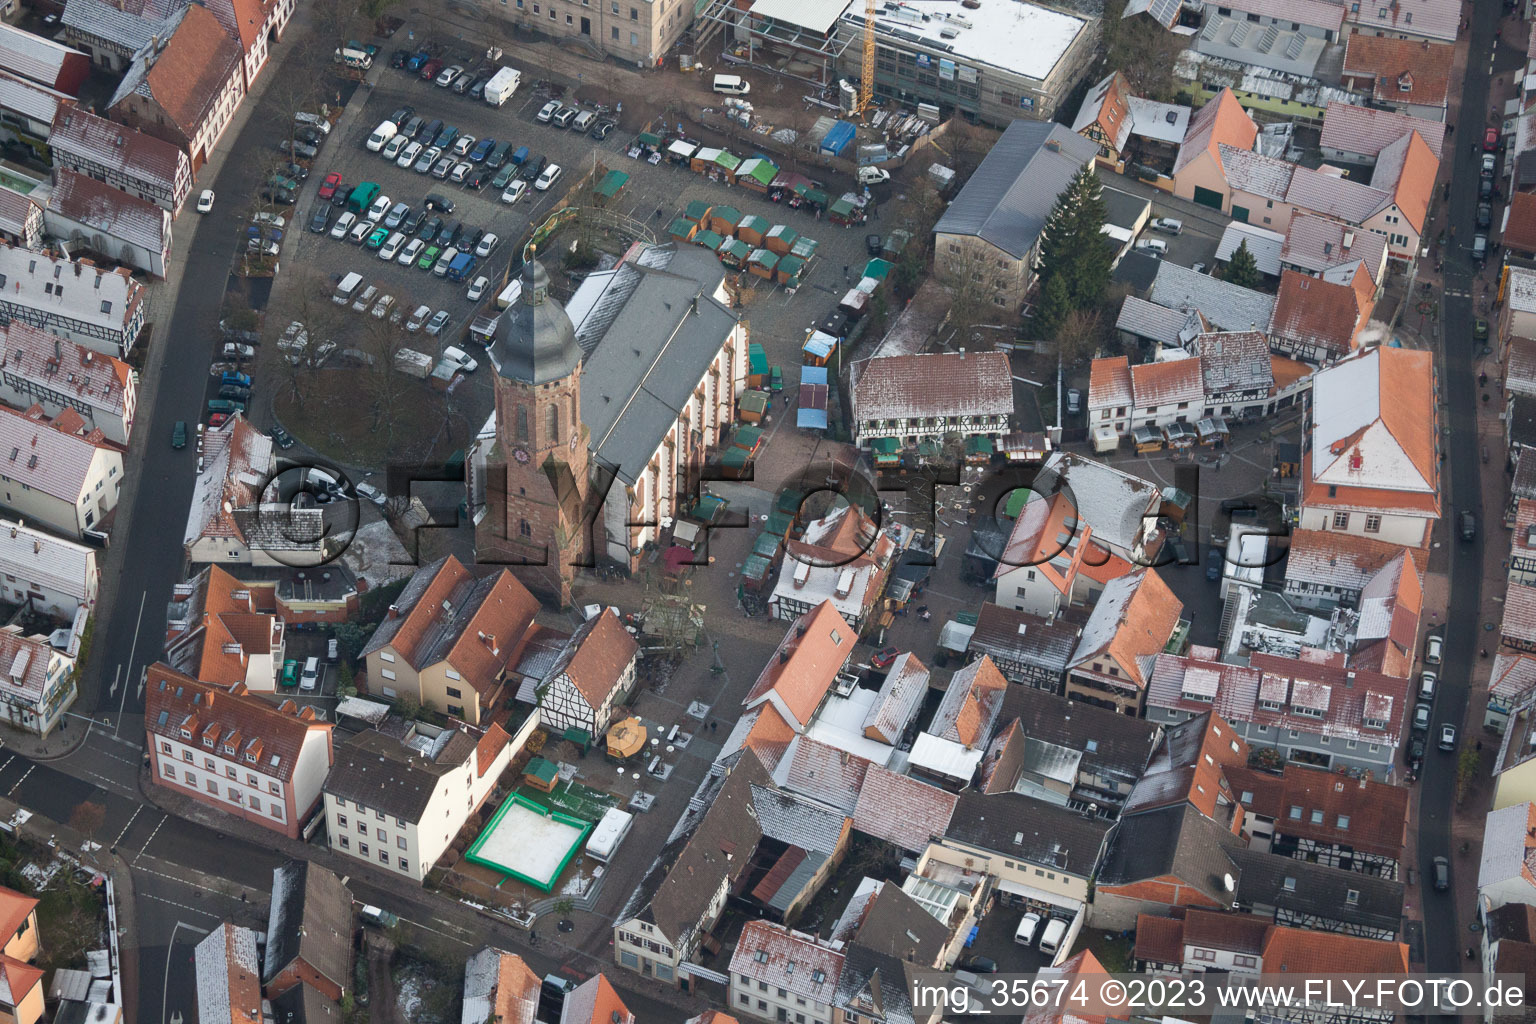 Aerial view of Christmas market at Plätzl and around St. George's Church in Kandel in the state Rhineland-Palatinate, Germany